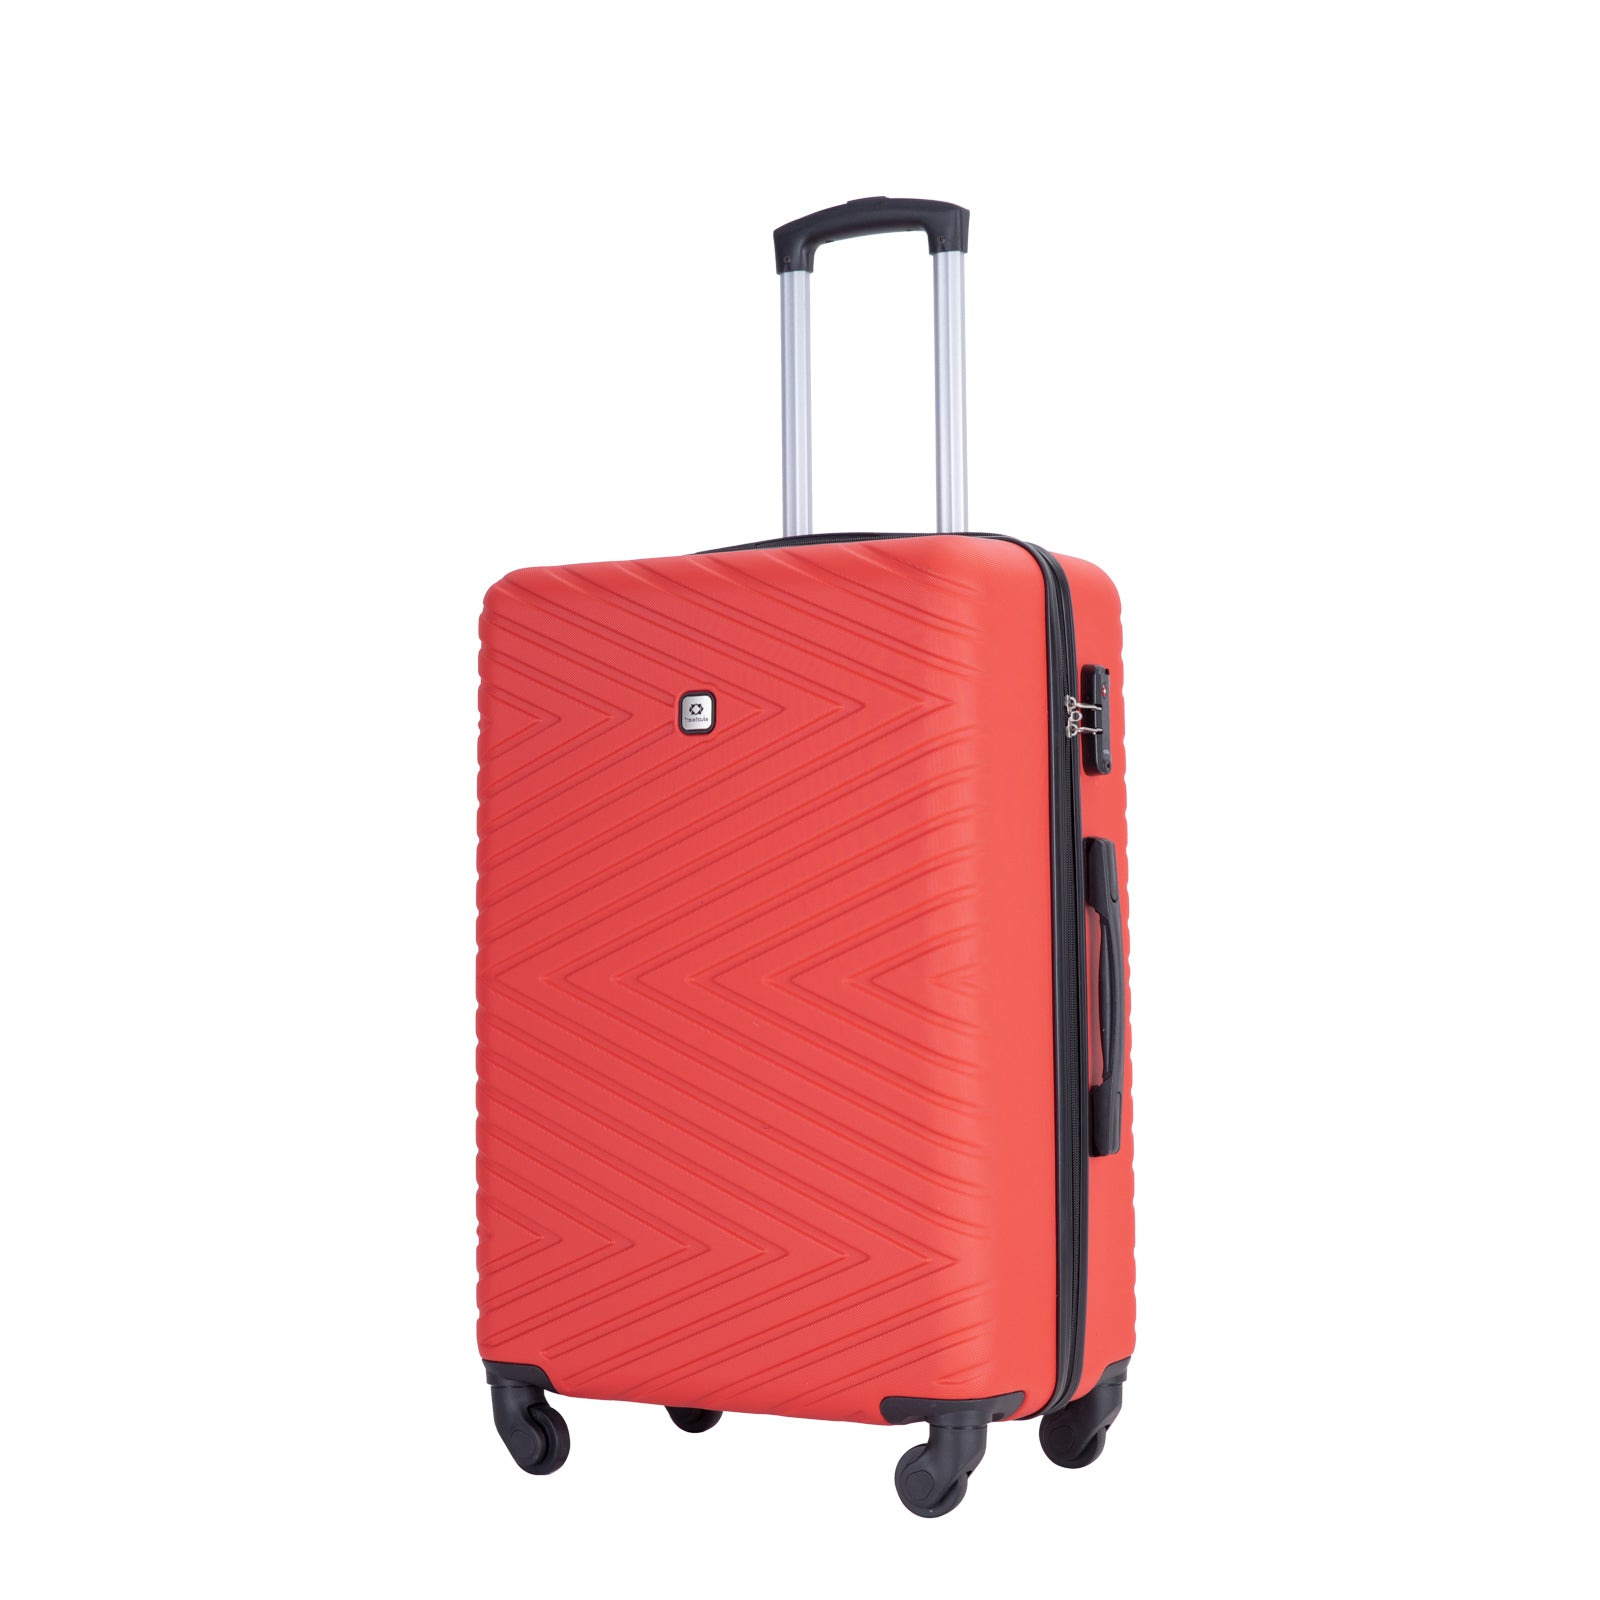 luggage 4 piece ABS lightweight suitcase with rotating red-abs